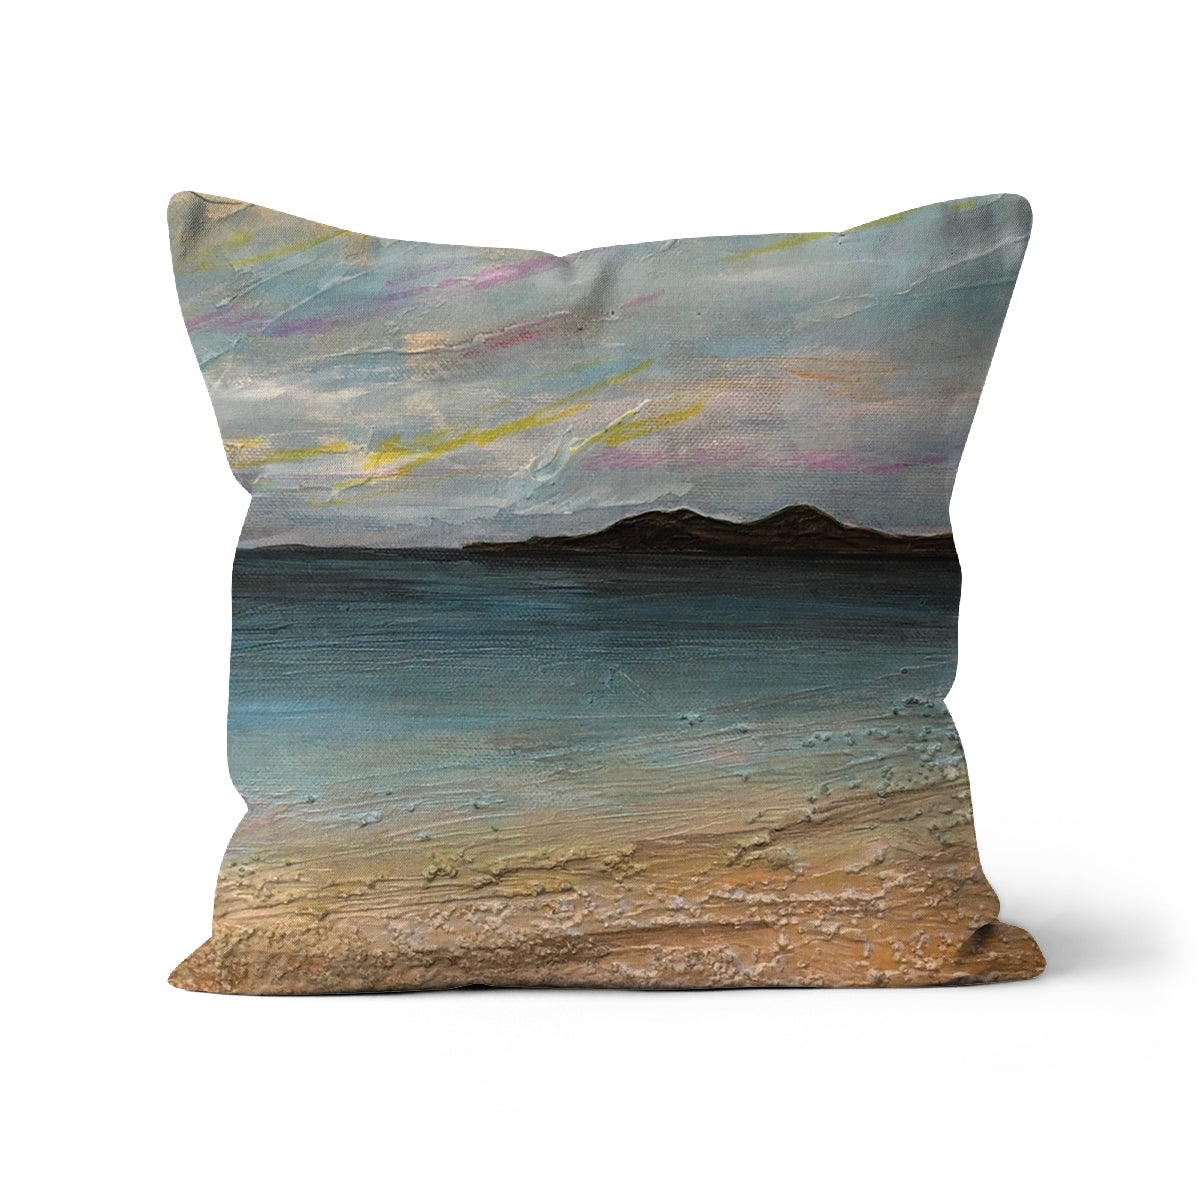 Garrynamonie Beach South Uist Art Gifts Cushion-Cushions-Hebridean Islands Art Gallery-Faux Suede-24"x24"-Paintings, Prints, Homeware, Art Gifts From Scotland By Scottish Artist Kevin Hunter